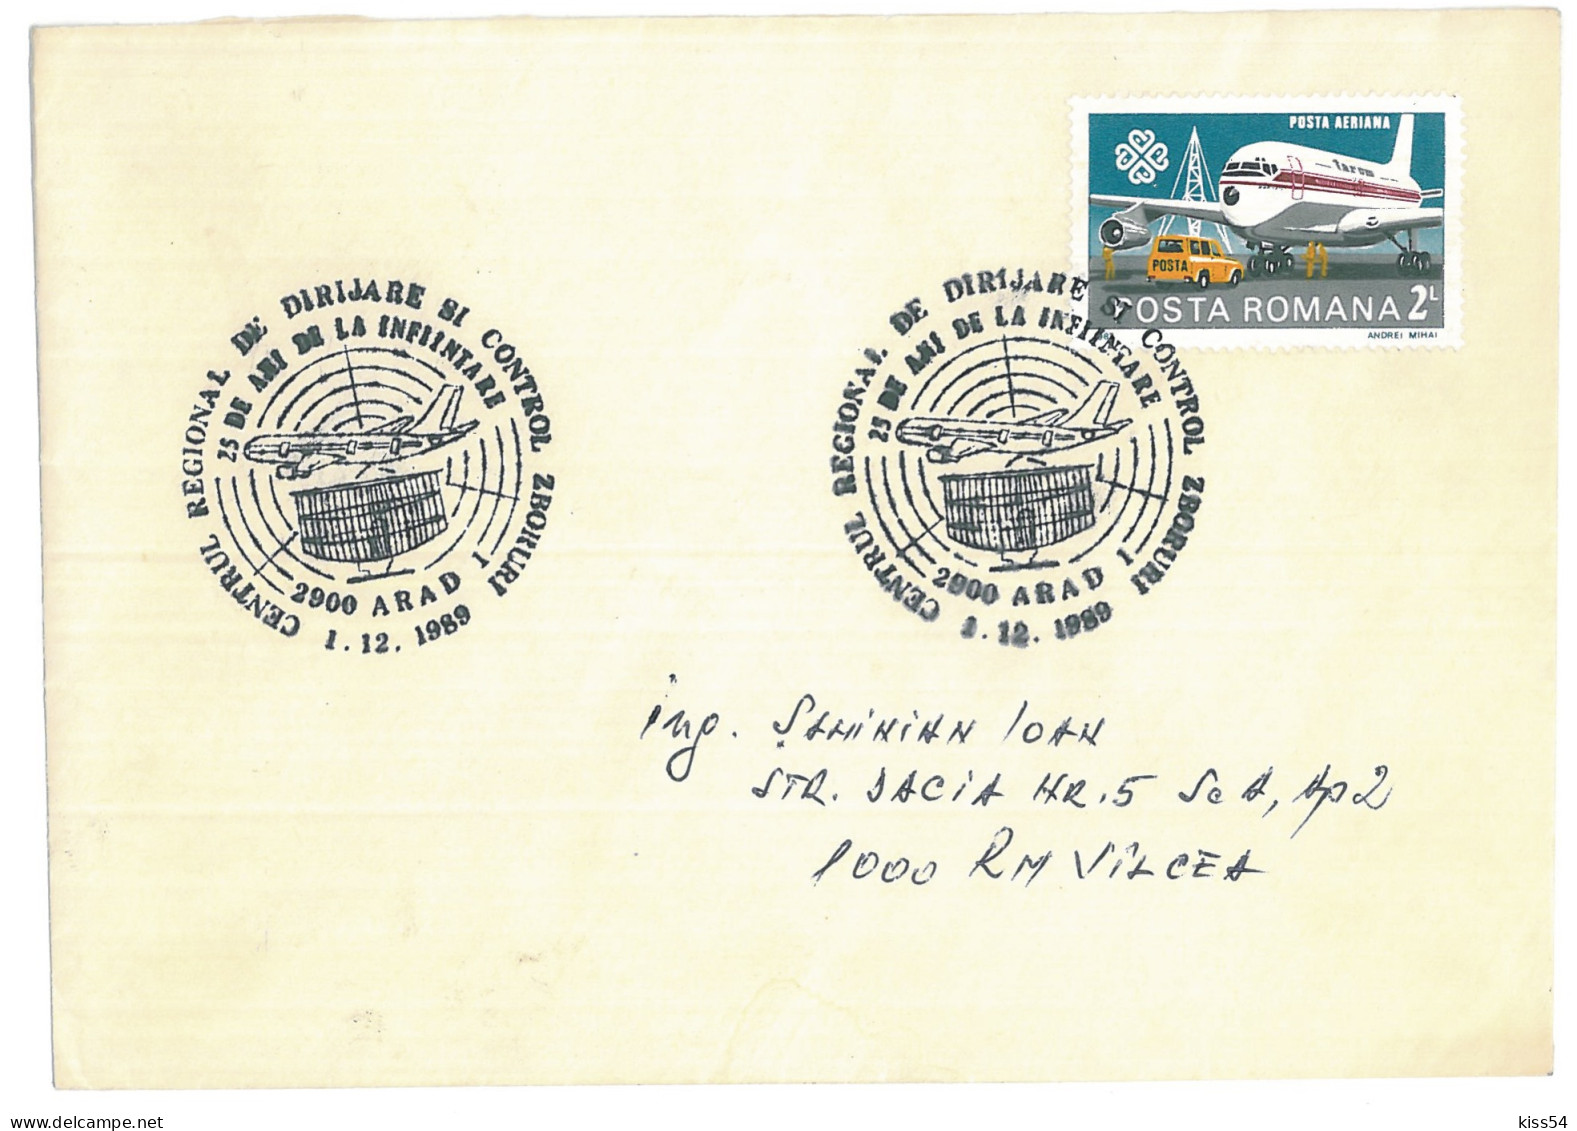 COV 22 - 215-a AIRPLANE, Romania - Cover - Used - 1989 - Covers & Documents